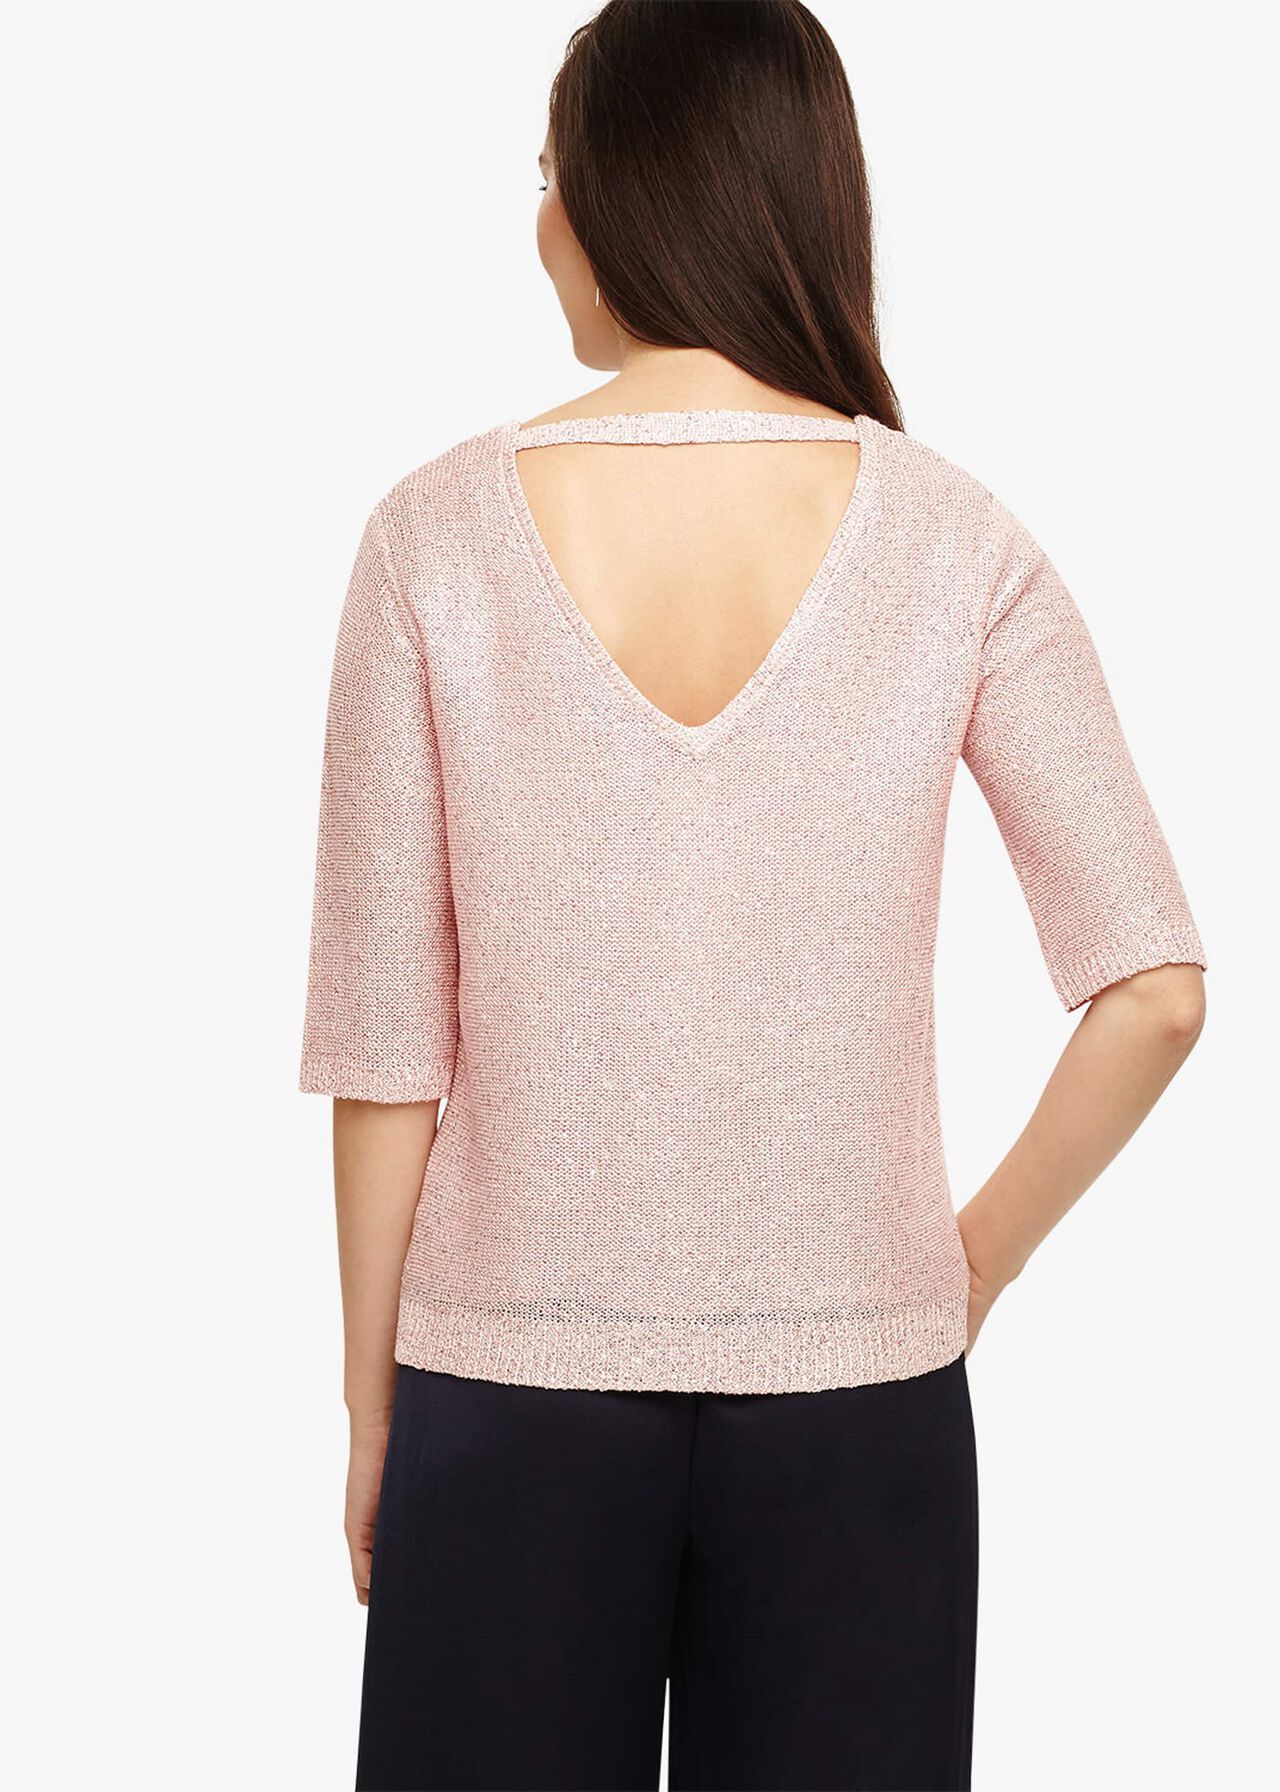 Caley Sequin Knitted Top